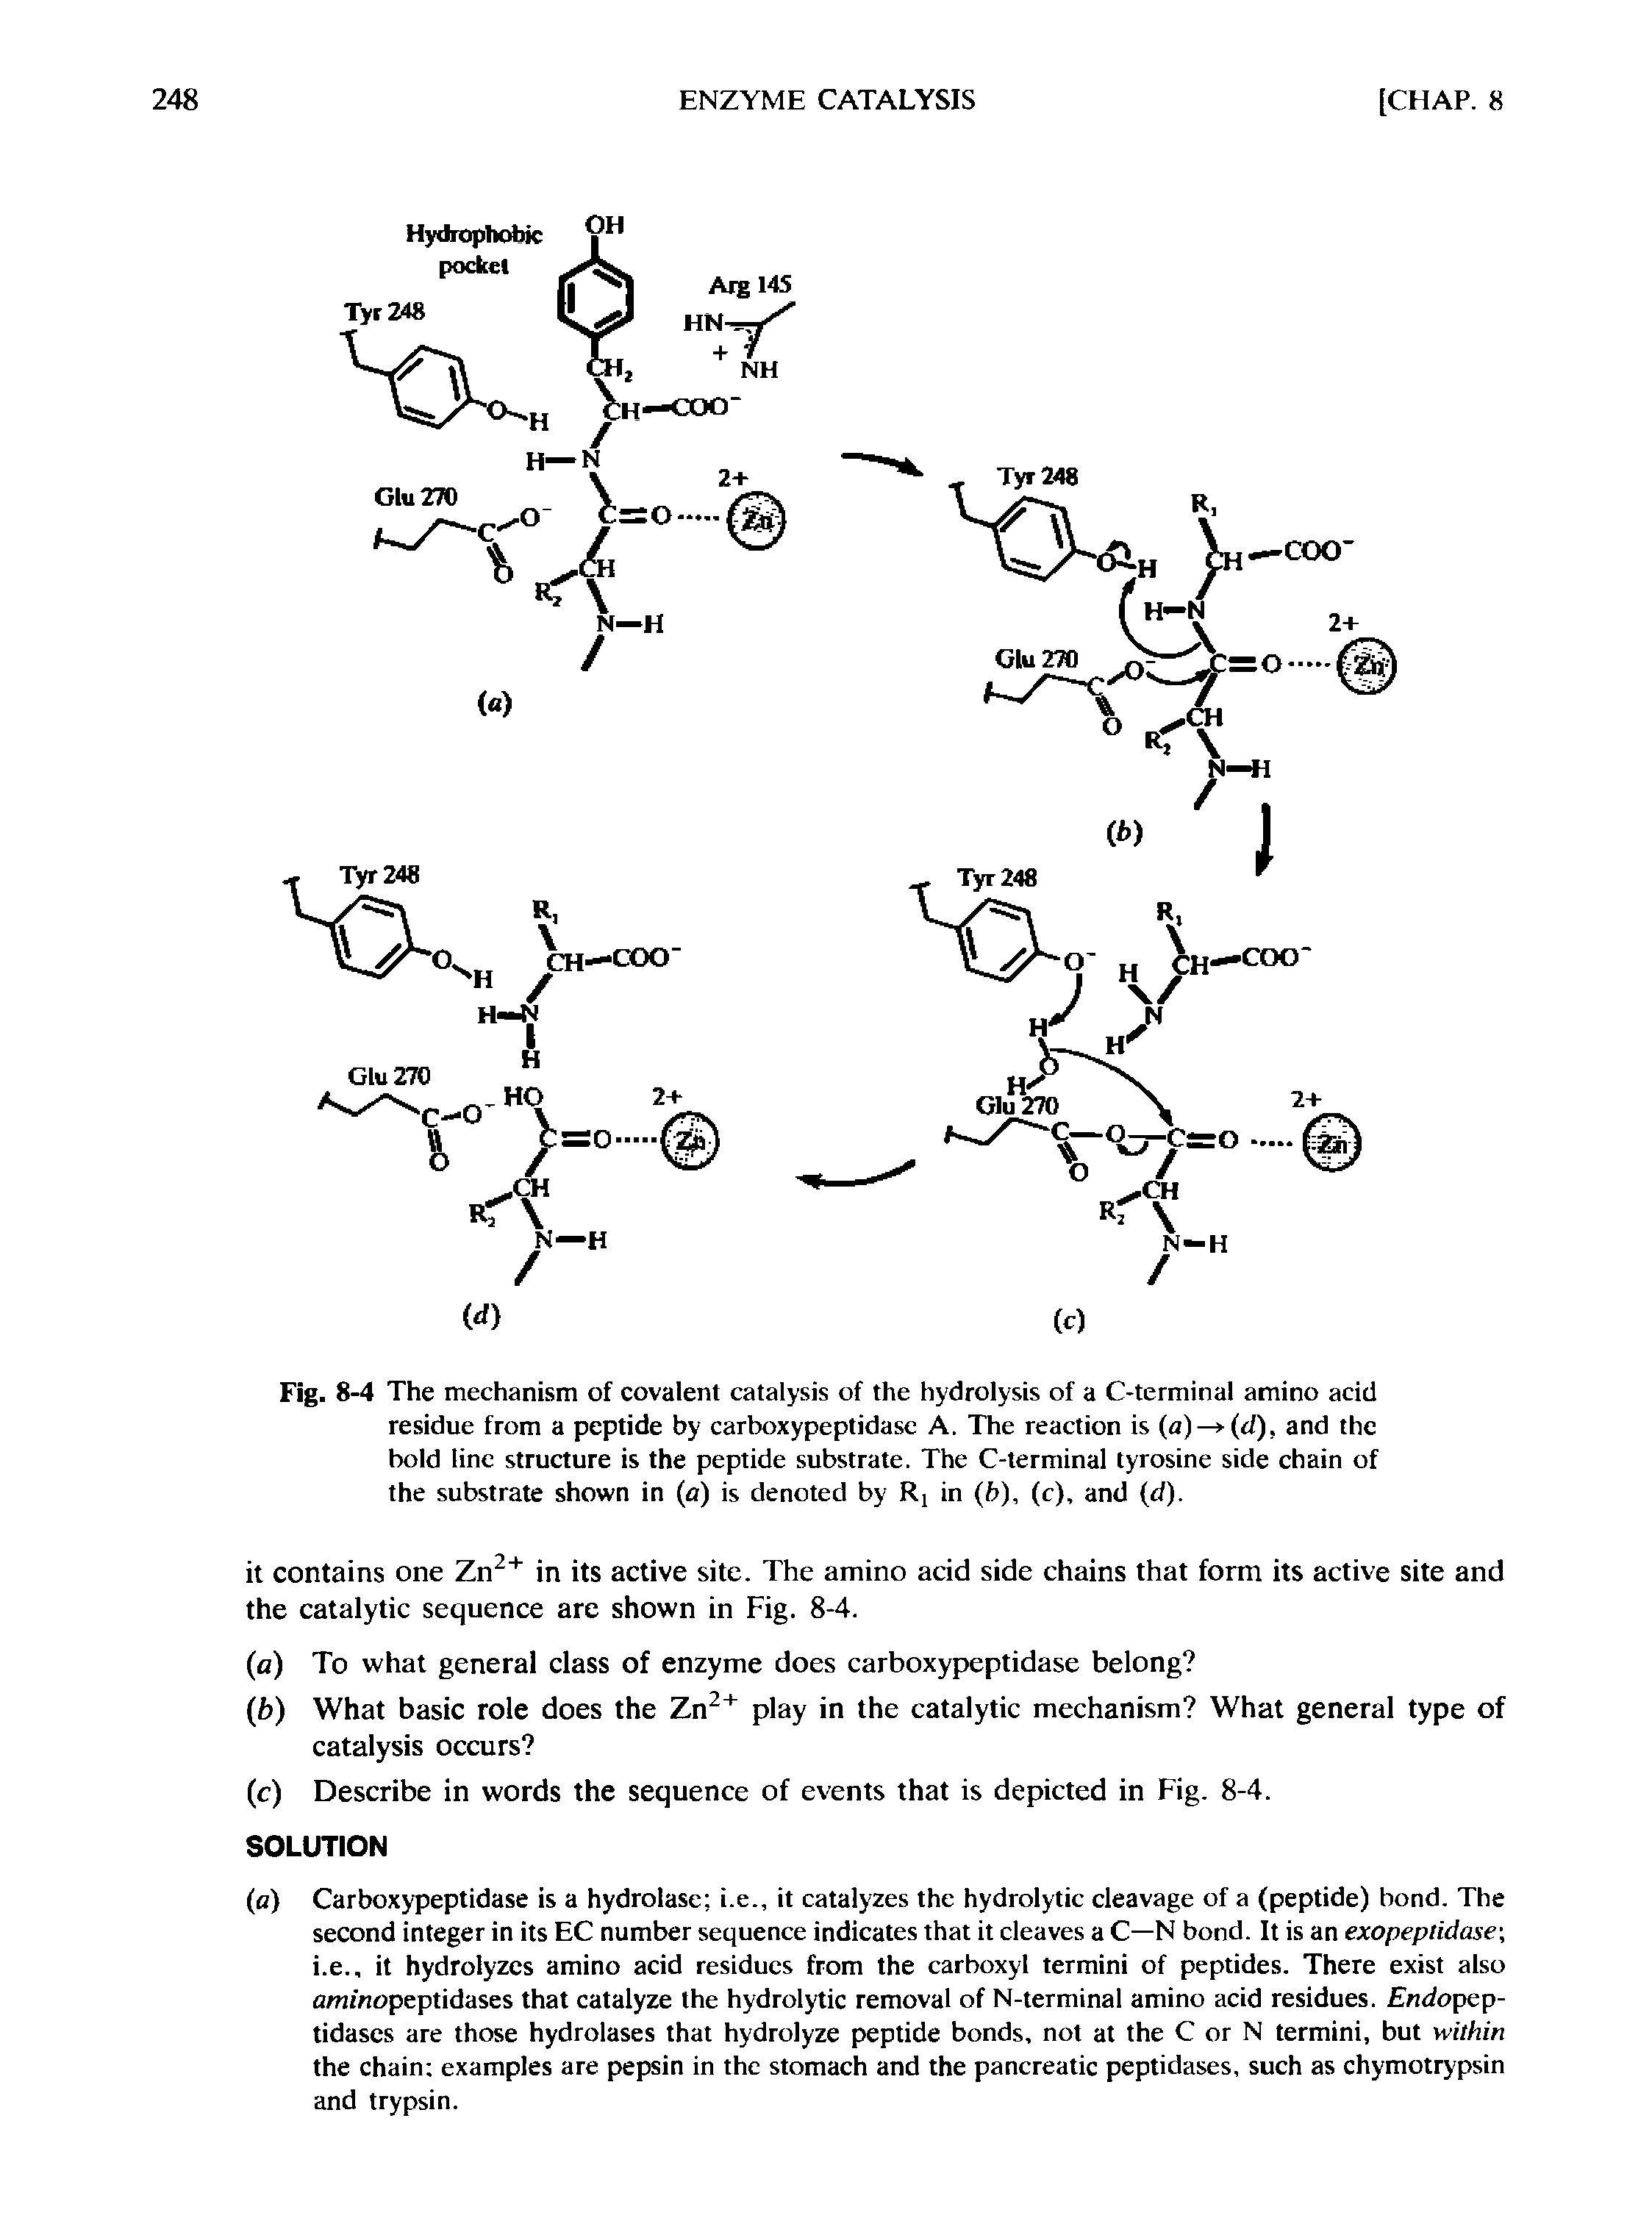 Fig. 8-4 The mechanism of covalent catalysis of the hydrolysis of a C-terminal amino acid residue from a peptide by carboxypeptidase A. The reaction is (a) —> (d), and the bold line structure is the peptide substrate. The C-terminal tyrosine side chain of the substrate shown in (a) is denoted by in (ft), (c), and (d).